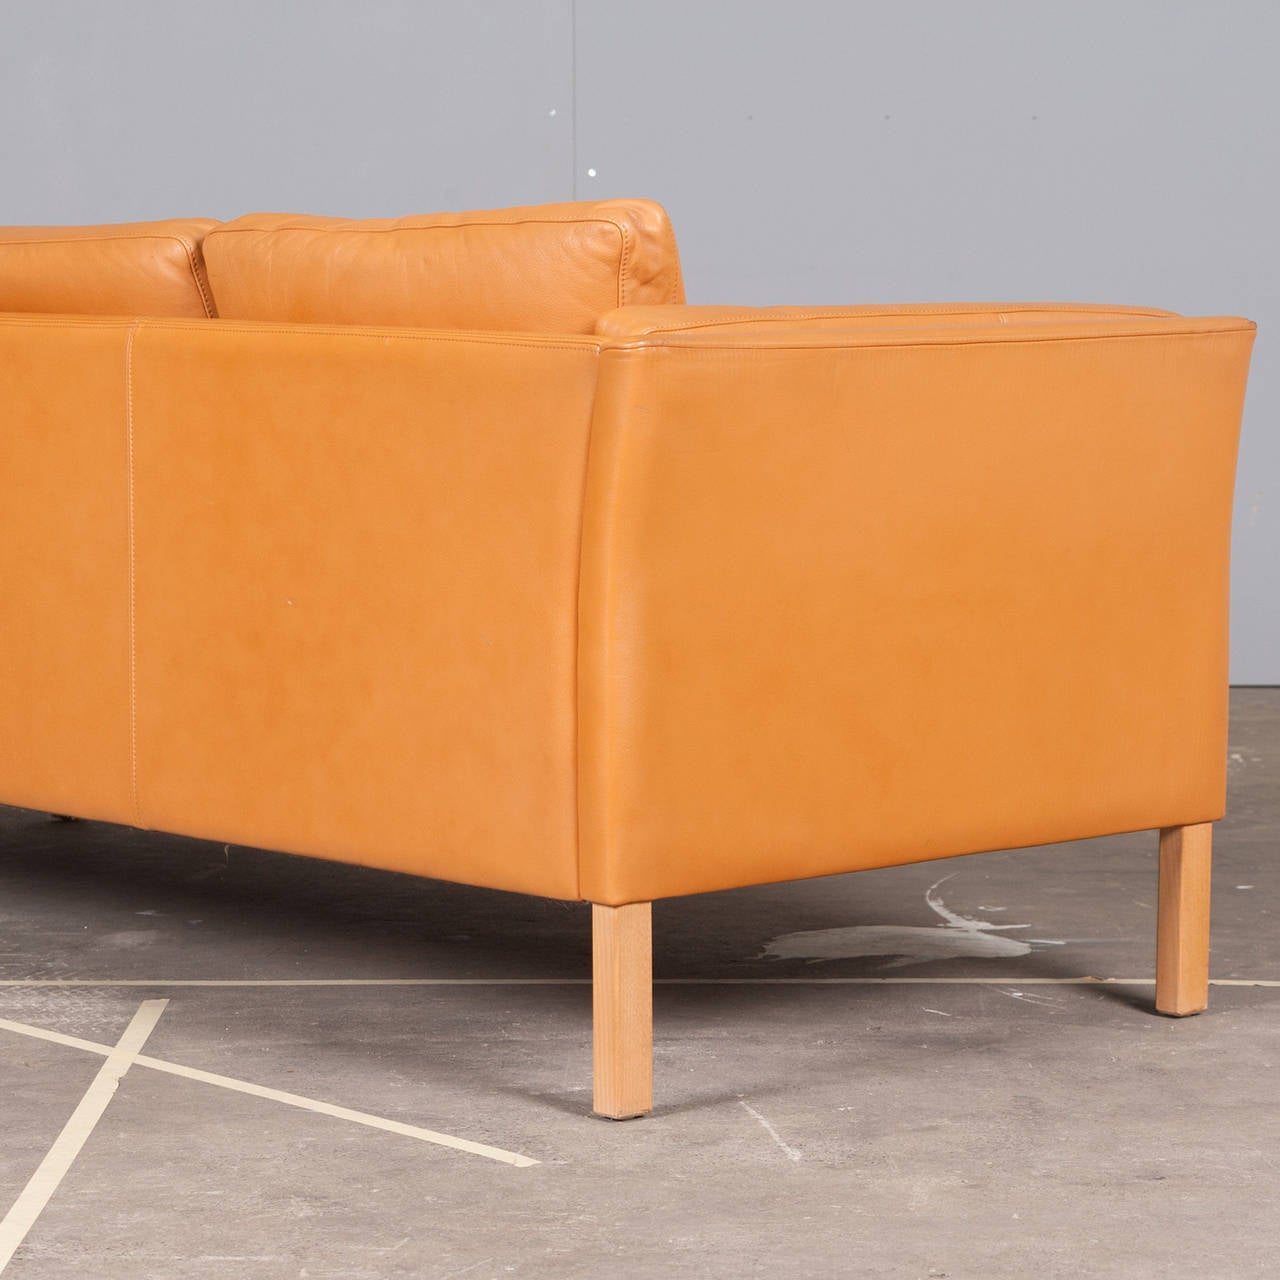 Danish Three-Seater Sofa in Honey Tan Leather, 1960s For Sale 3